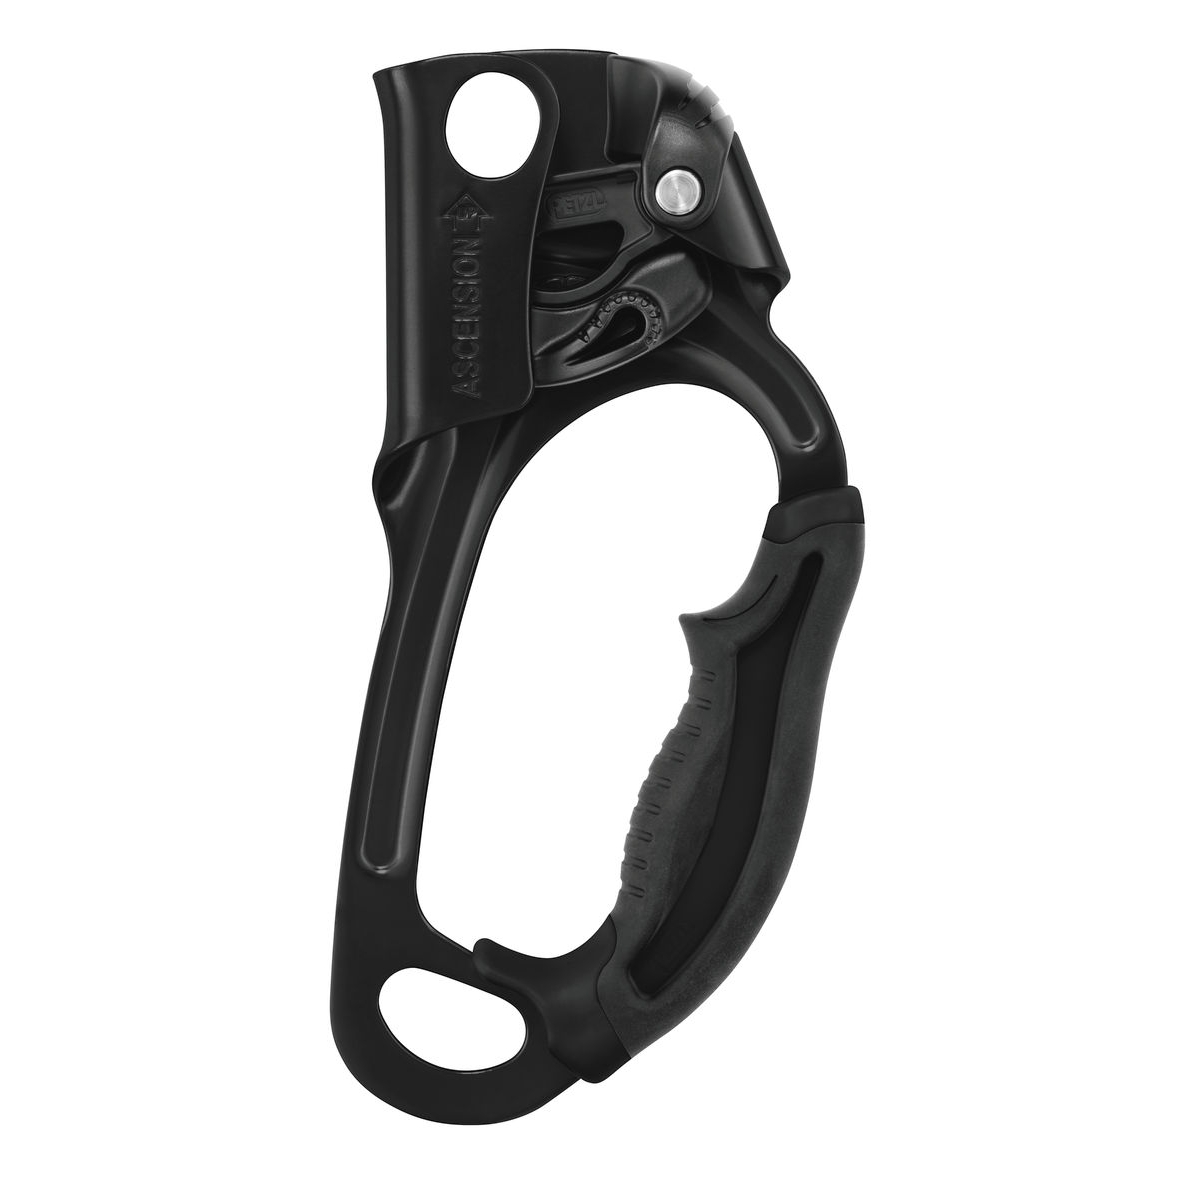 Petzl Ascension Handled Rope Clamp For Rope Ascents